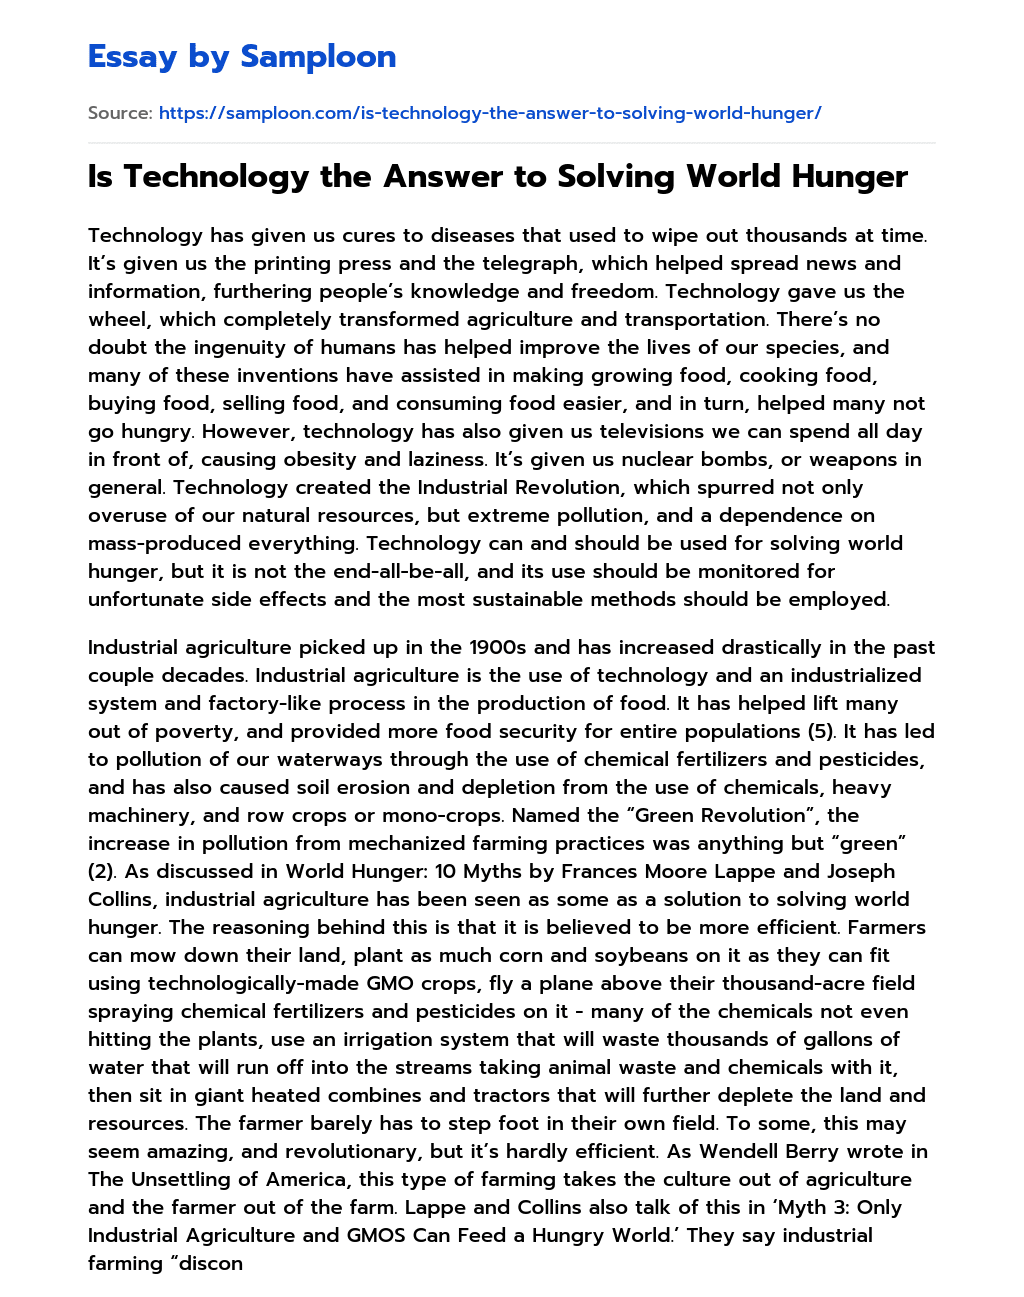 Is Technology the Answer to Solving World Hunger essay